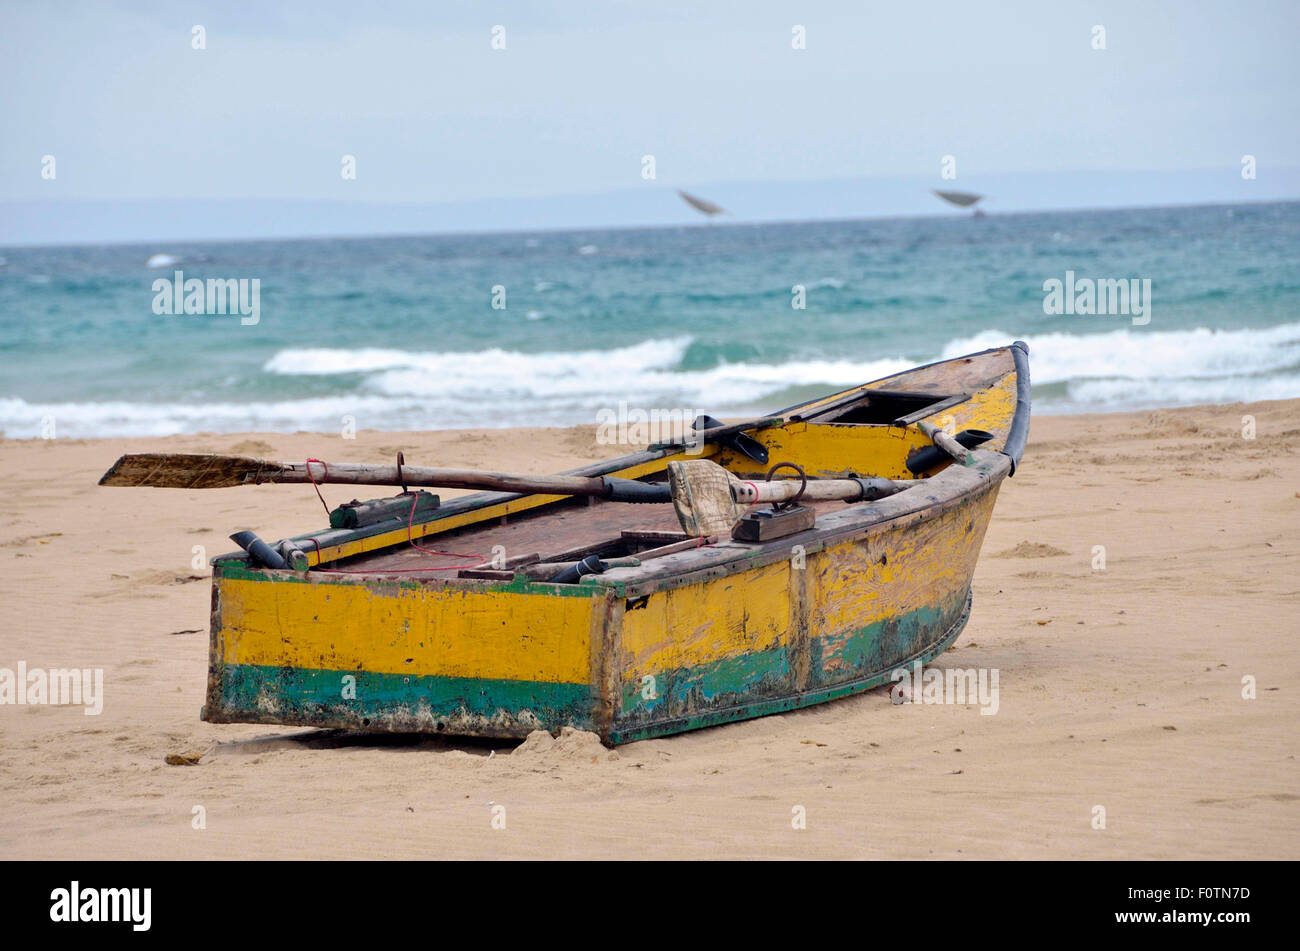 Old dilapidated fishing boats lying on the beach at Inhambane, Mozambique. These are unsafe and home repaired but used daily Stock Photo